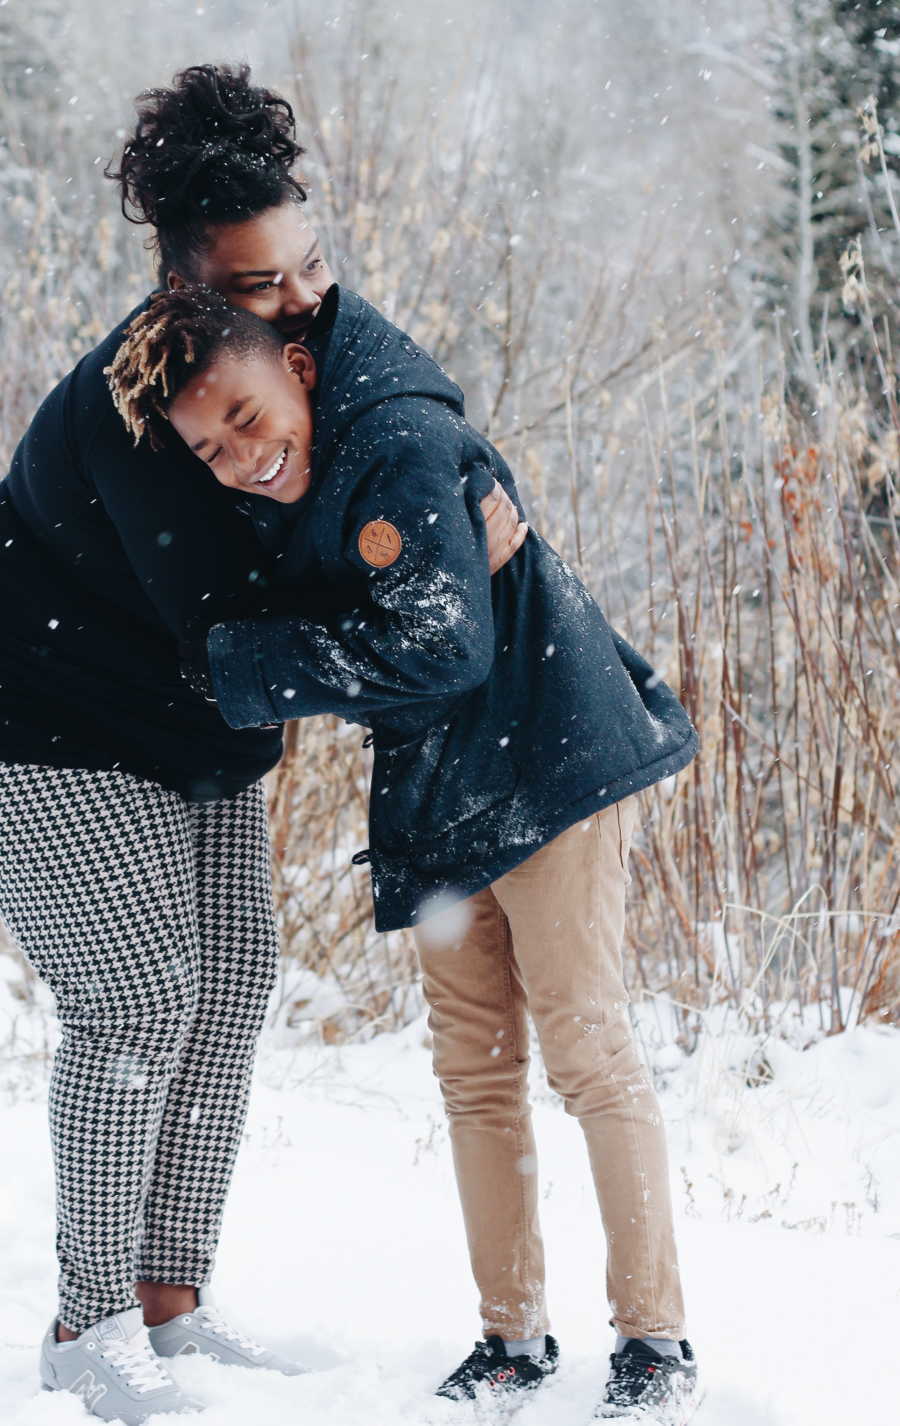 Birth mother hugging son she gave up for adoption outside in snow